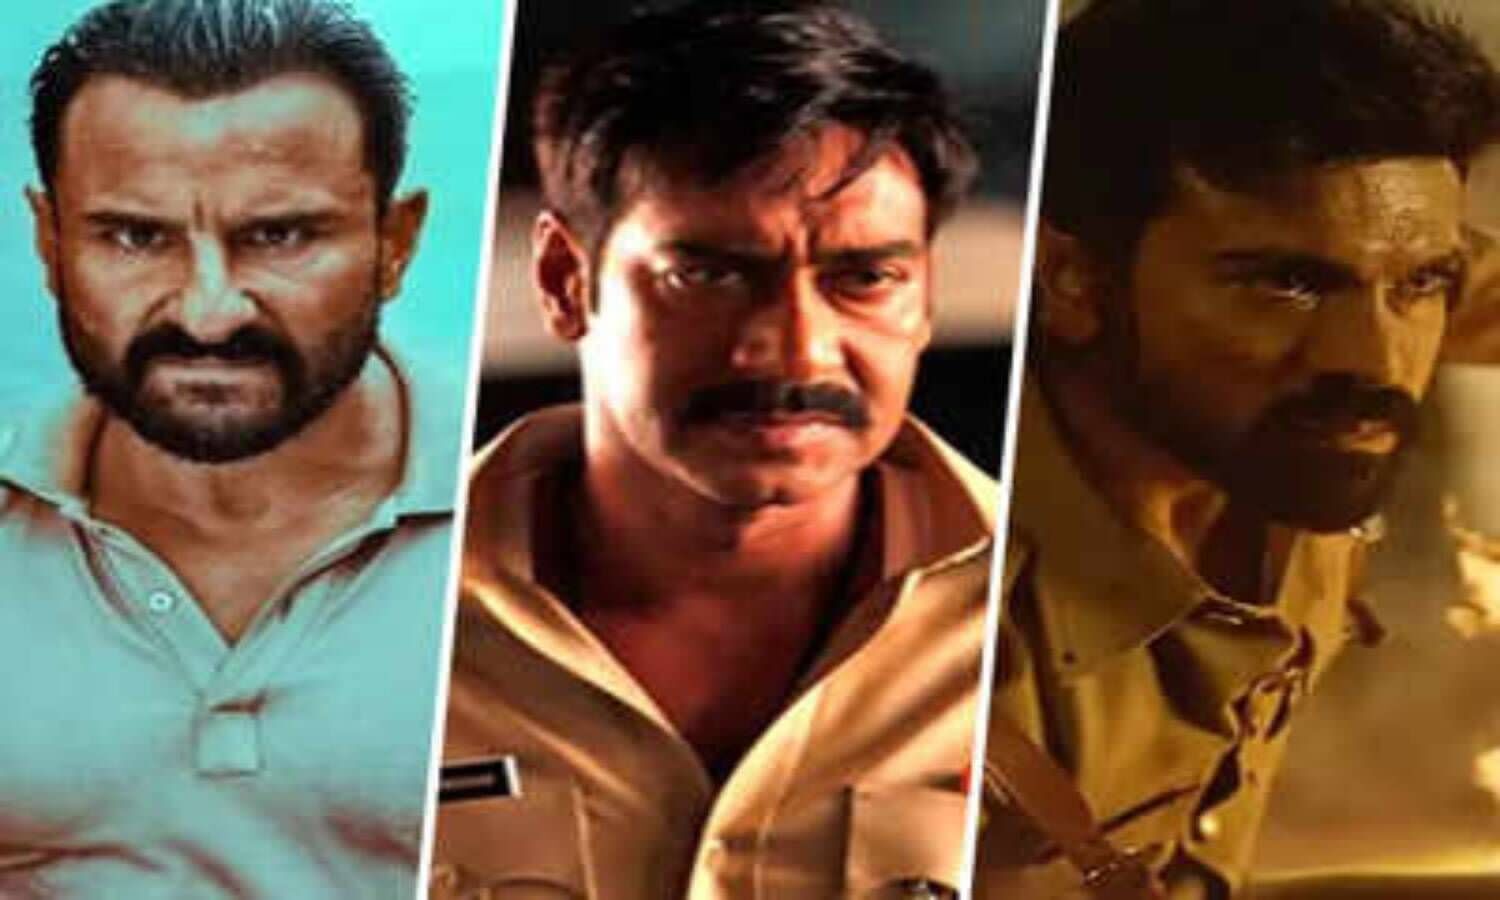 Actors Play Police Role: These celebs, including Saif Ali Khan and Ram Charan, played the role of a strong police officer